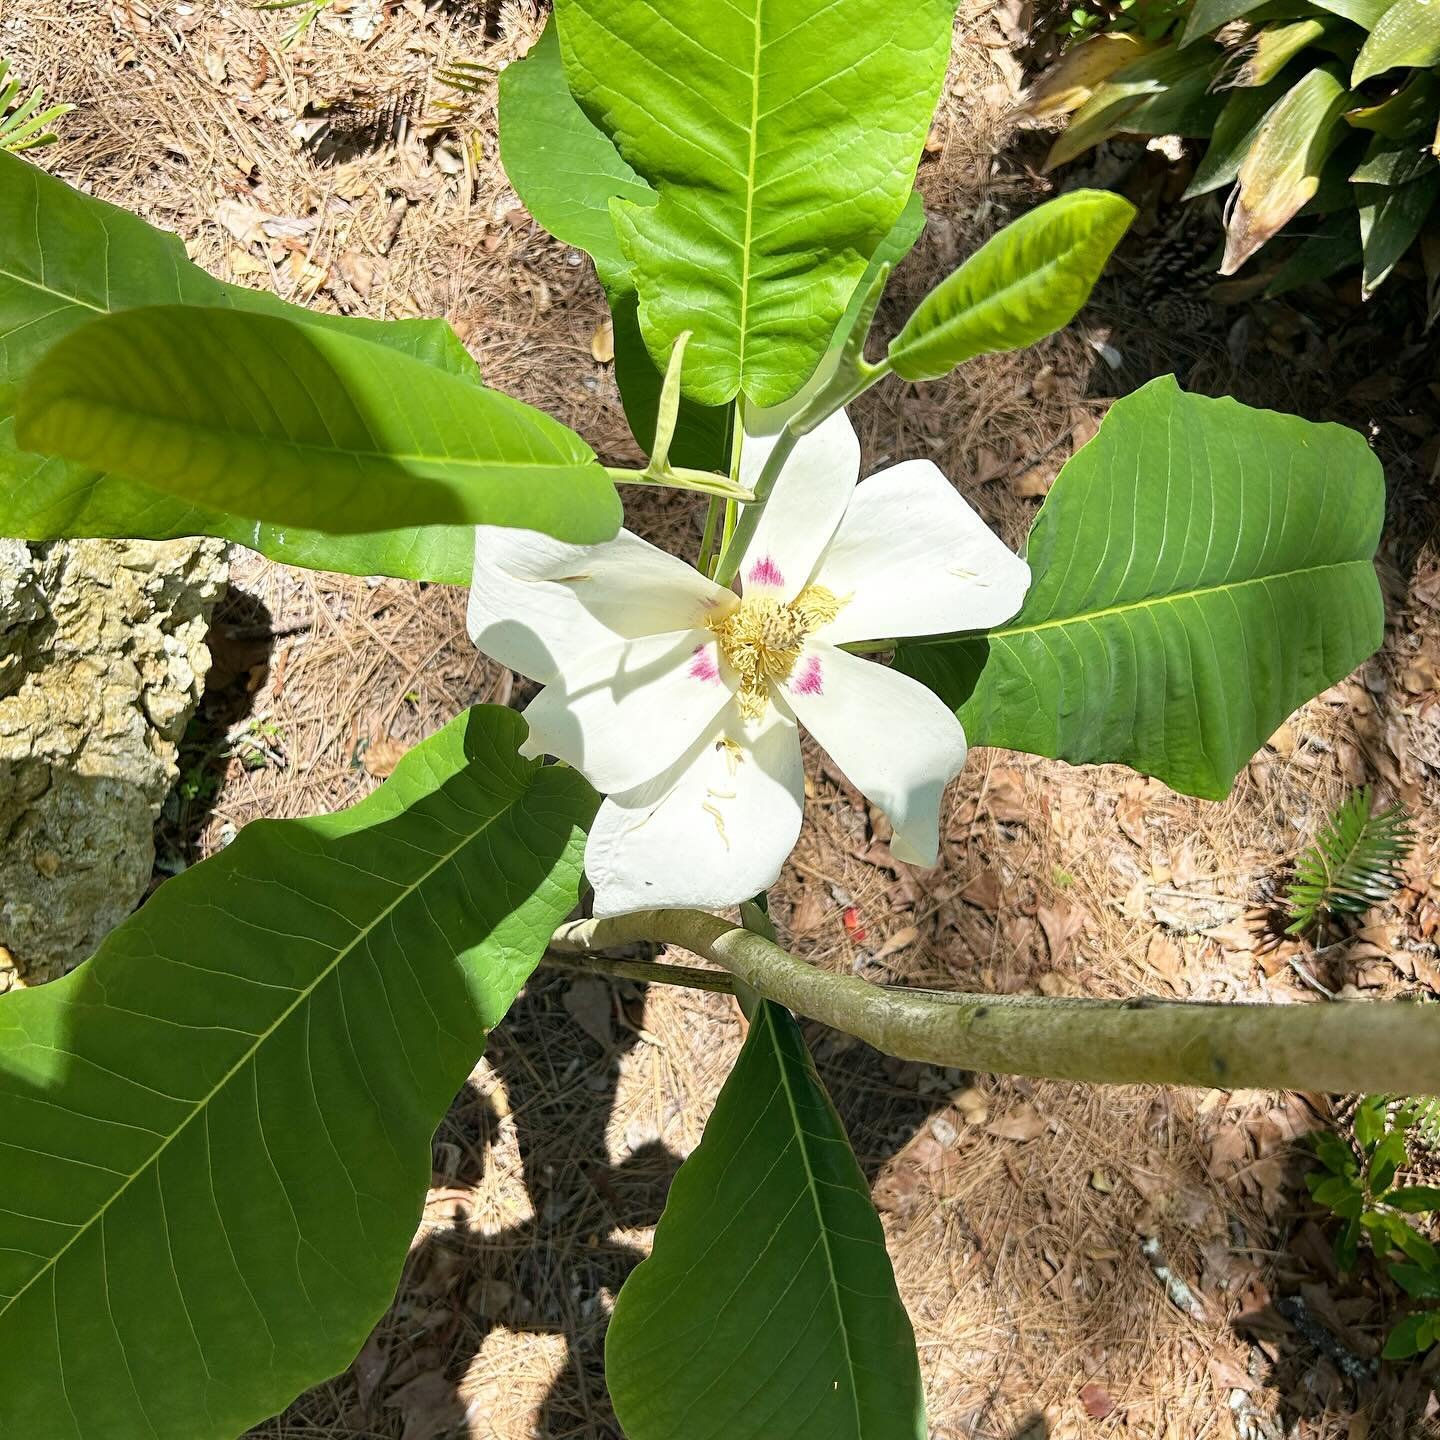 A rare (and native) tree: the Ashe Magnolia. The blooms make their appearance every April. Given its rarity, I think it&rsquo;s an obligation for us to cultivate this plant in our garden and preserve it in our forests. 

*grows best in well-drained s